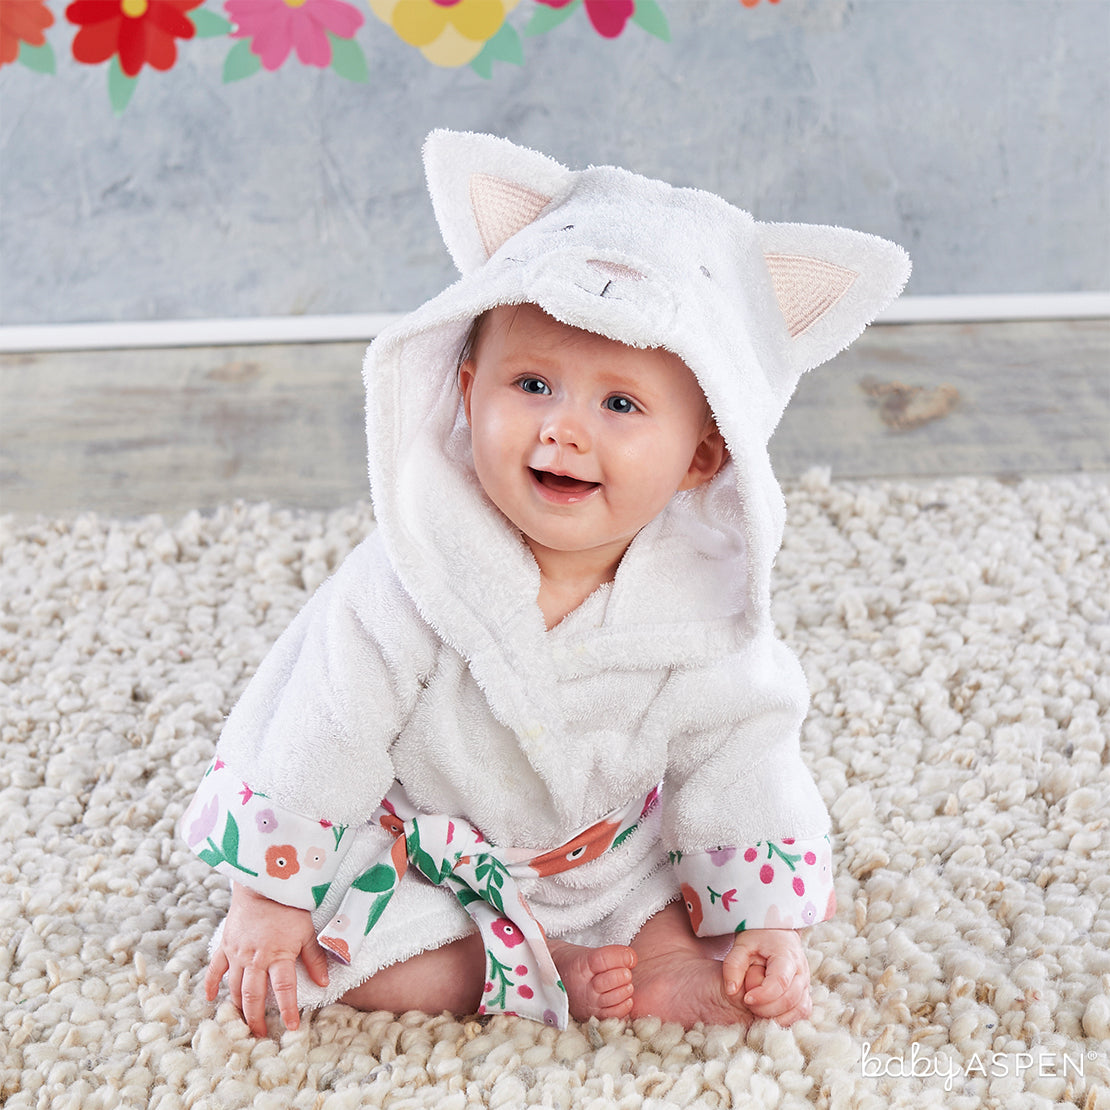 Cat Hooded Robe | 11 Warm Snuggly Bath Robes + Giveaway | Baby Aspen